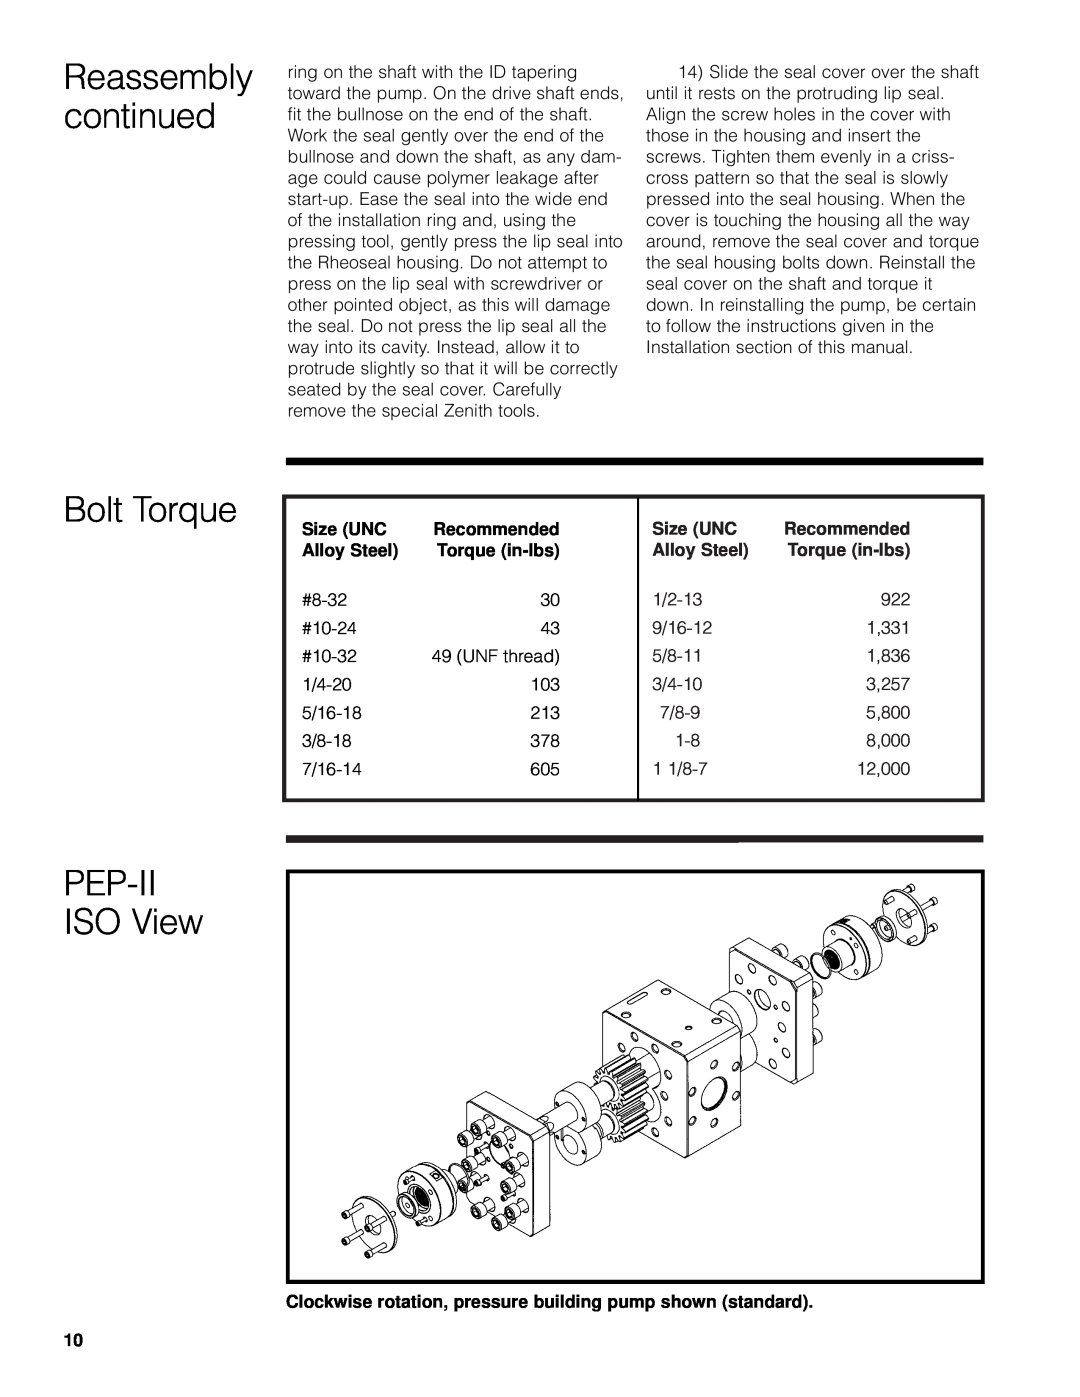 Zenith Pumps manual Bolt Torque, Pep-Ii, ISO View, Reassembly continued, Size UNC, Recommended, Alloy Steel, Torque in-lbs 